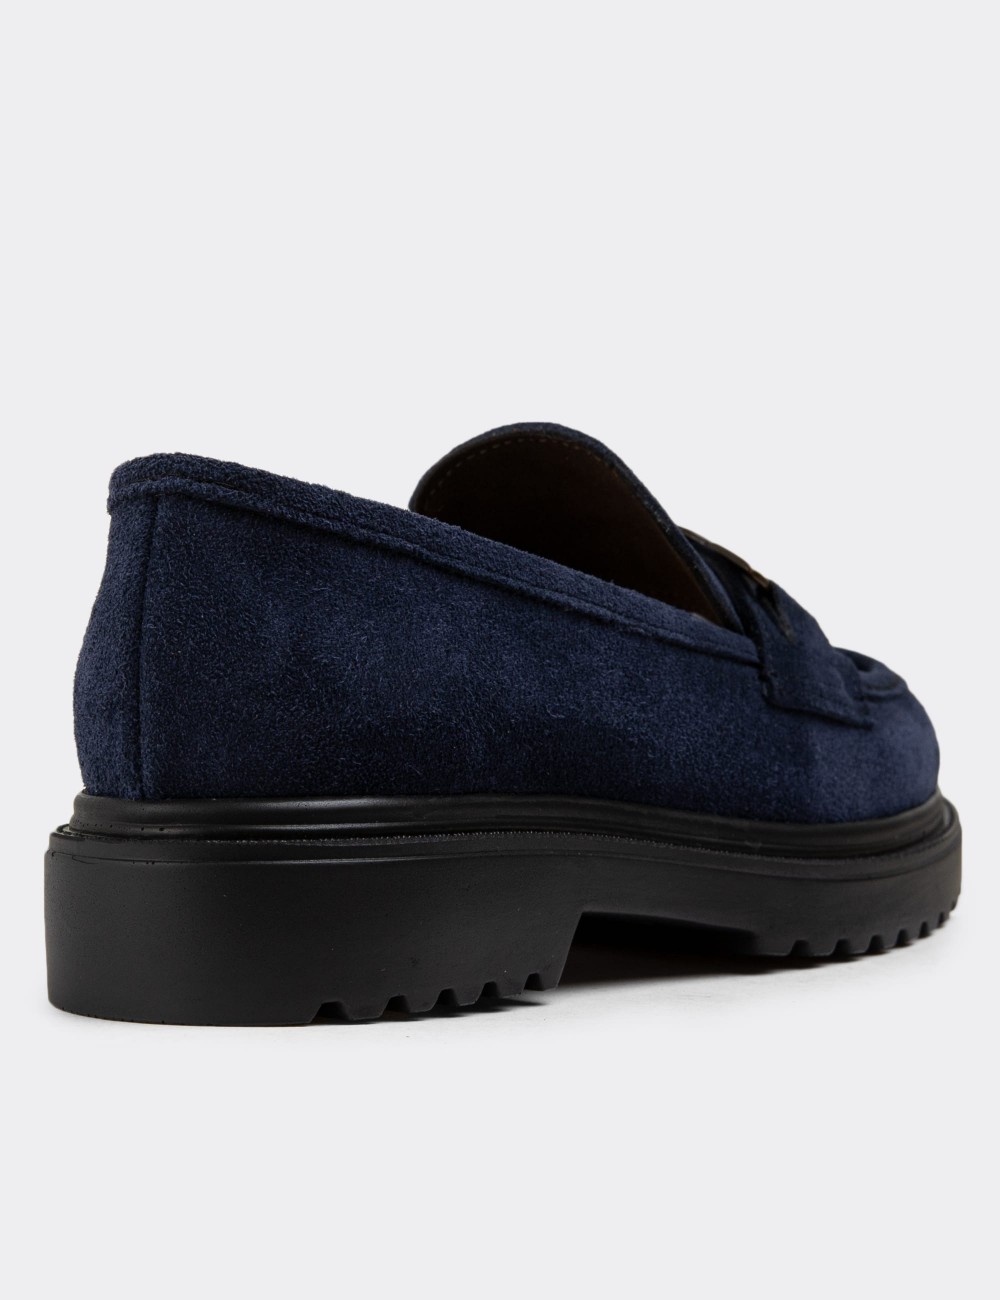 Navy Suede Leather Loafers - 01902ZLCVP01